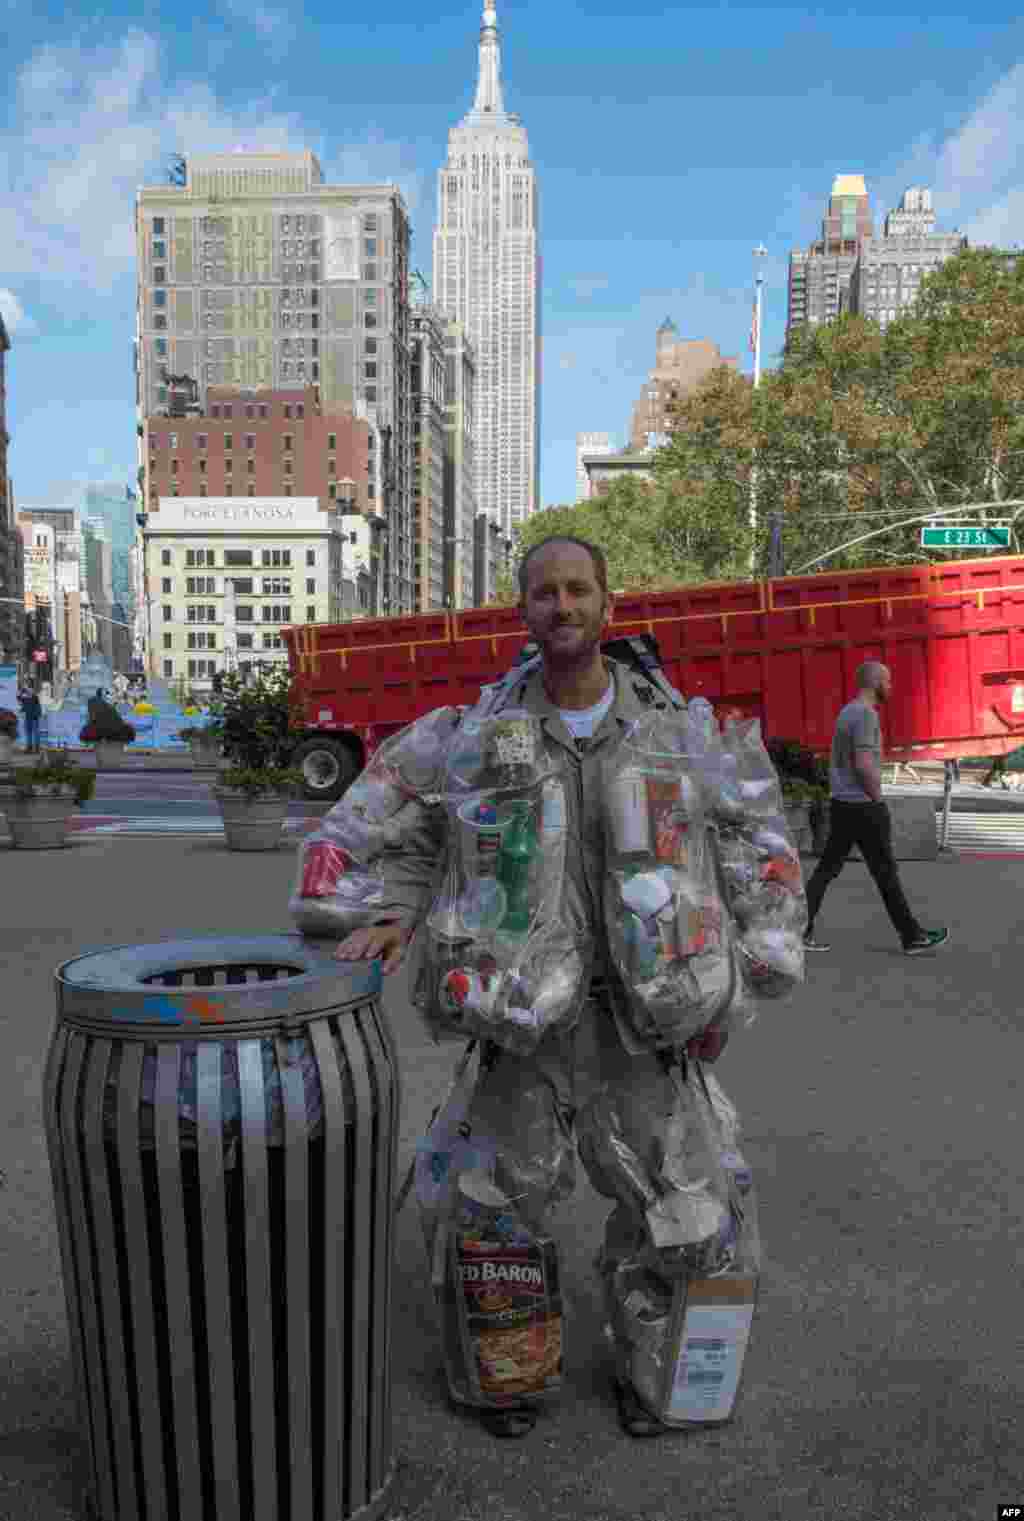 Rob Greenfield, an environmental activist who is spending a month in New York, hangs plastic bags on himself that are full of the trash he has produced.